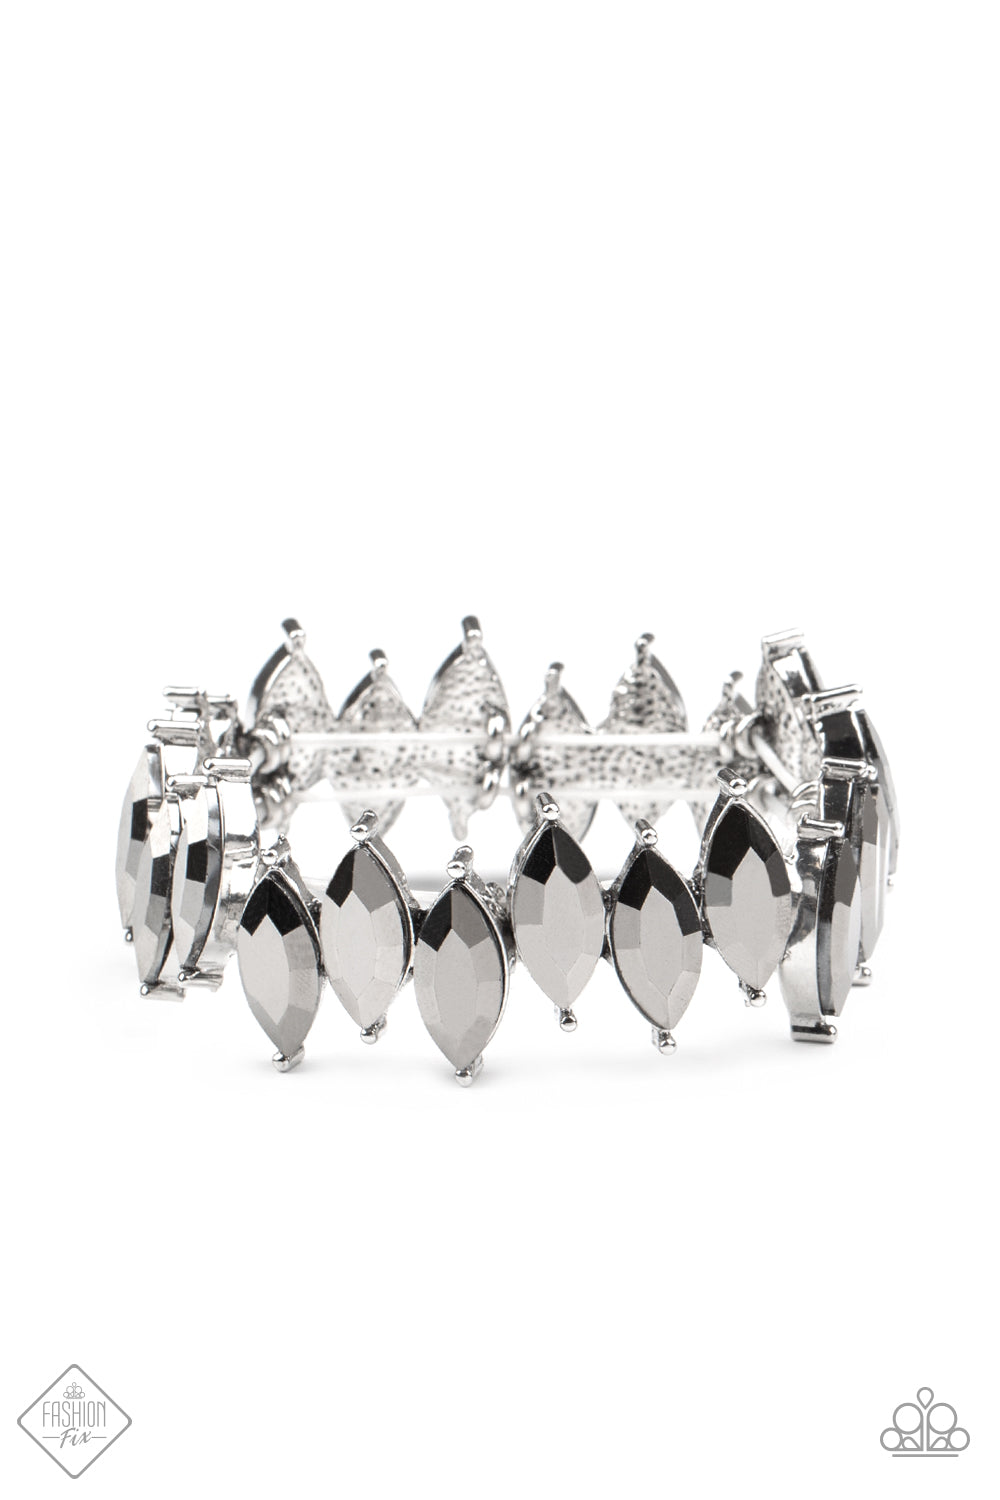 Paparazzi Fiercely Fragmented Silver Stretch Bracelet - Fashion Fix Magnificent Musings October 2020